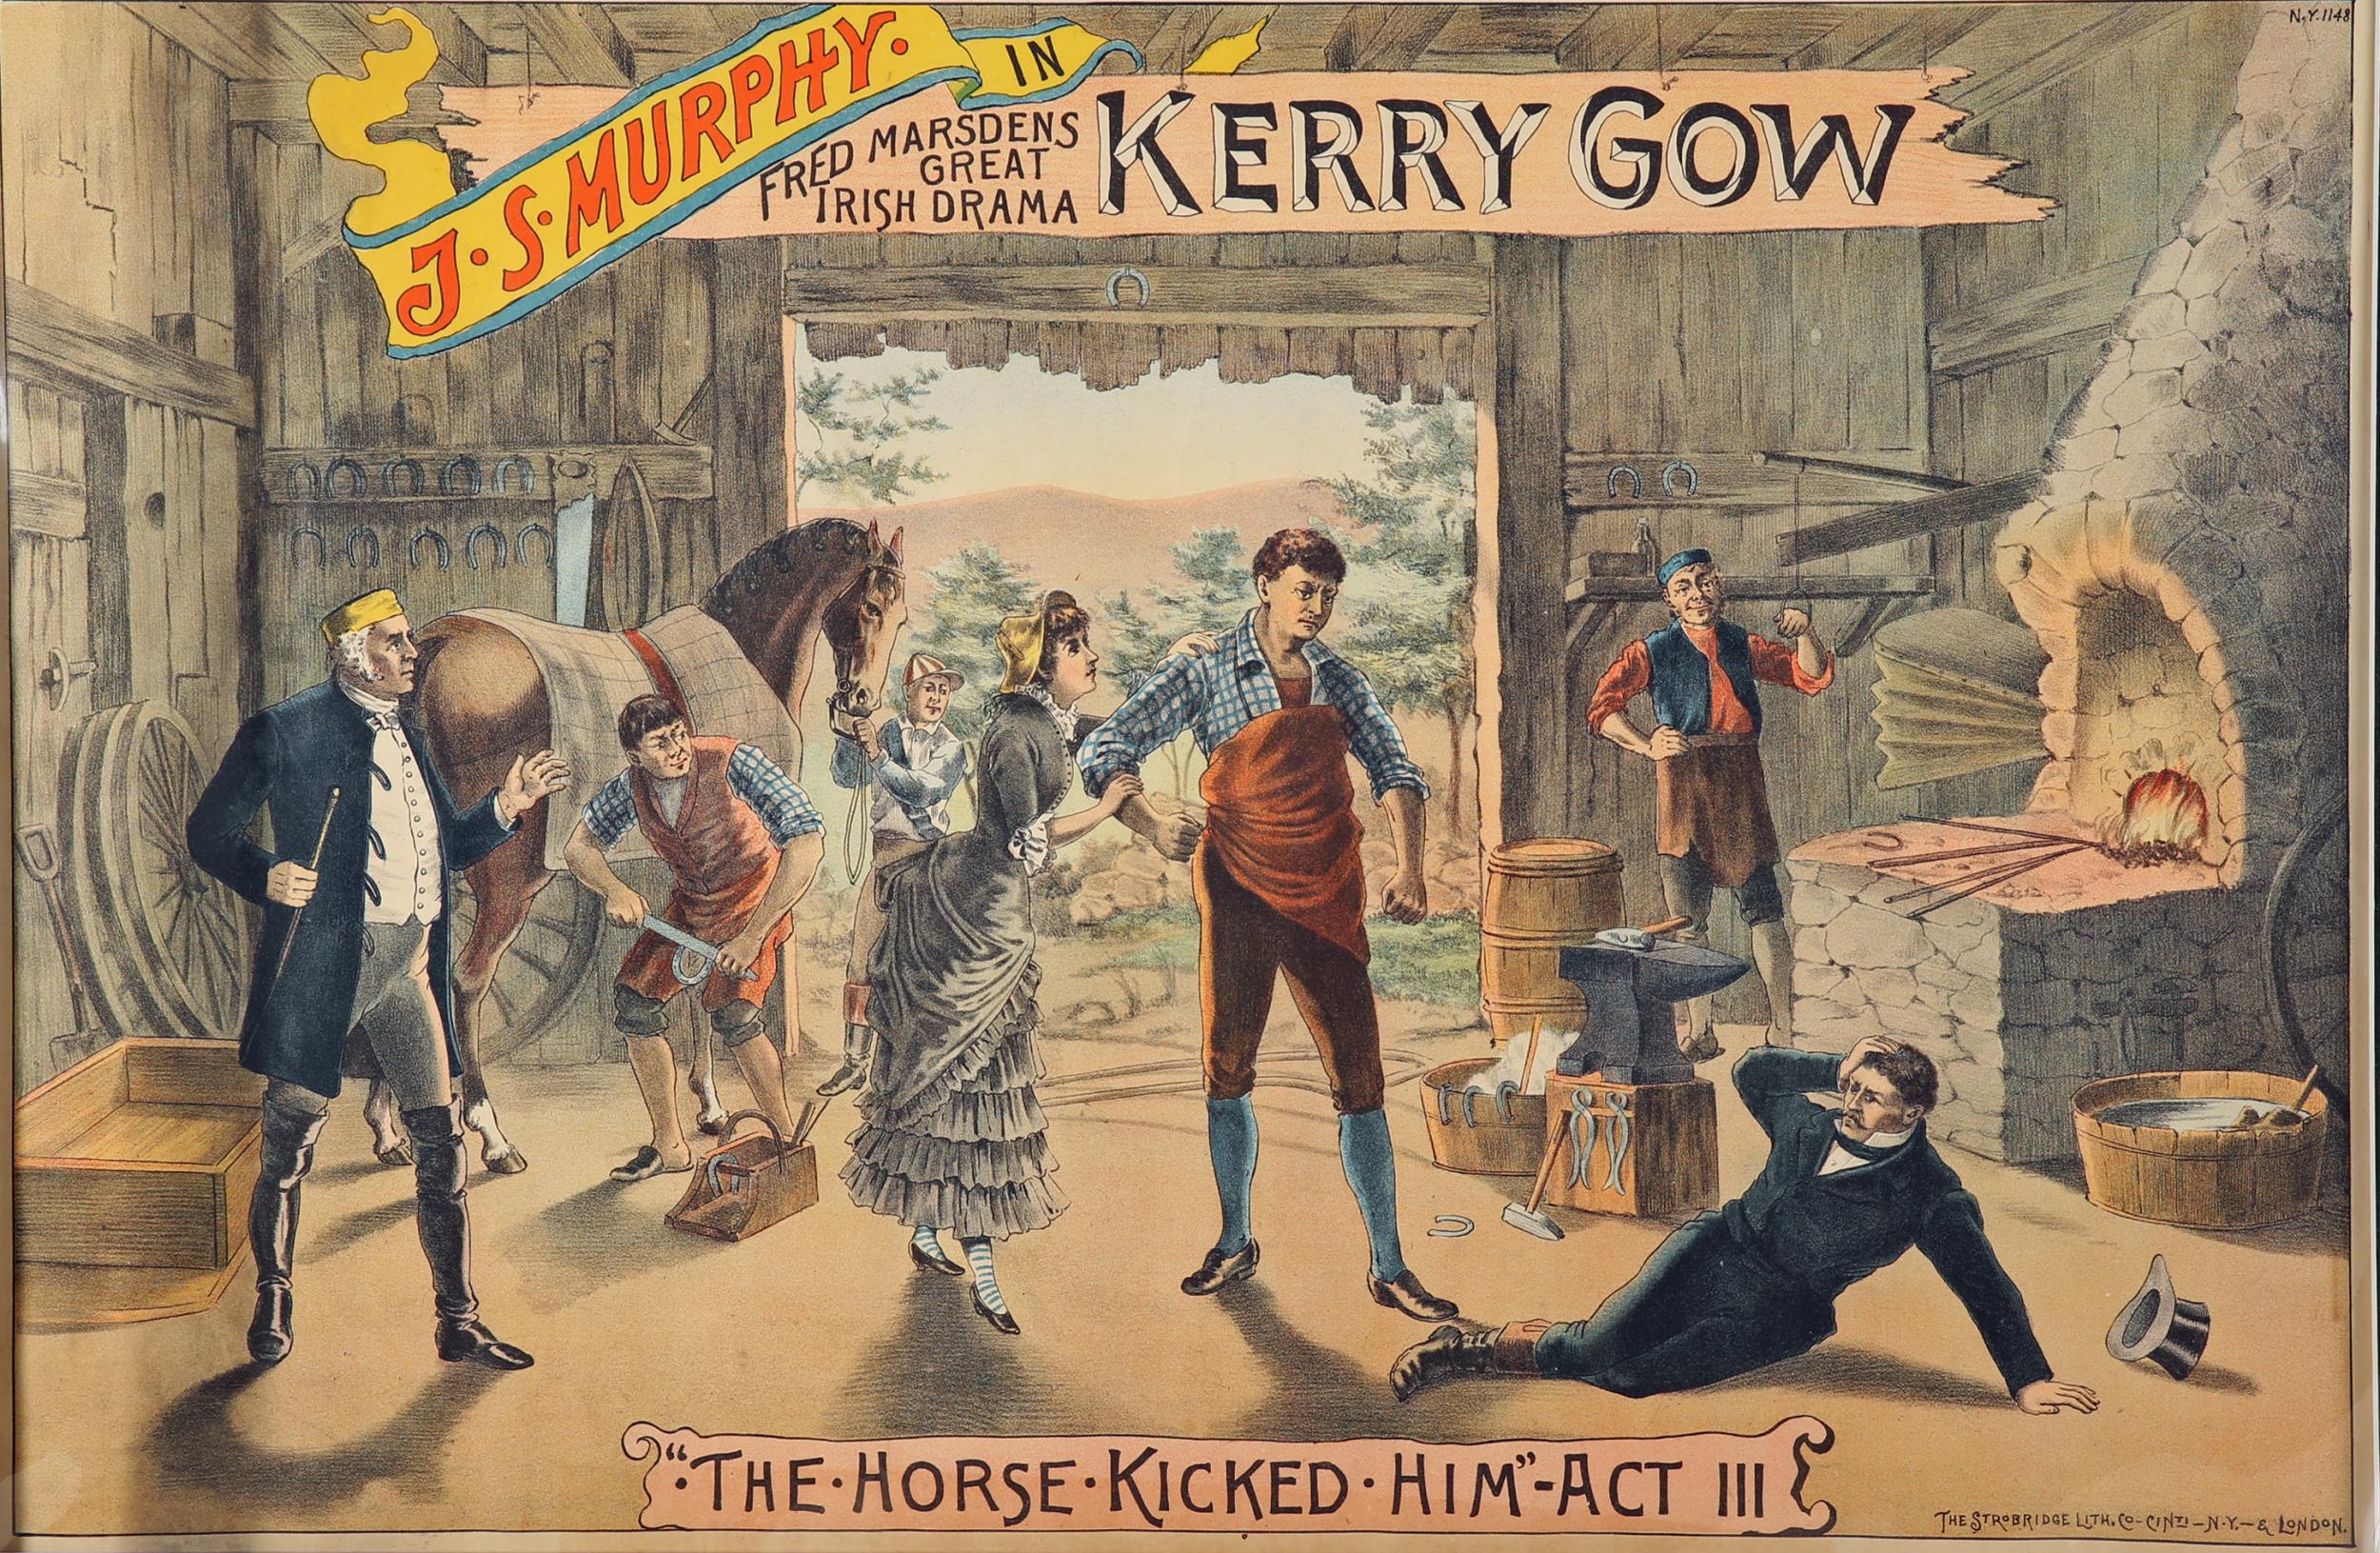 Theatre Poster. J.S. Murphy, Fred Marsden's Great Irish Drama, Kerry Gow, "The Horse Kicked Him" Act